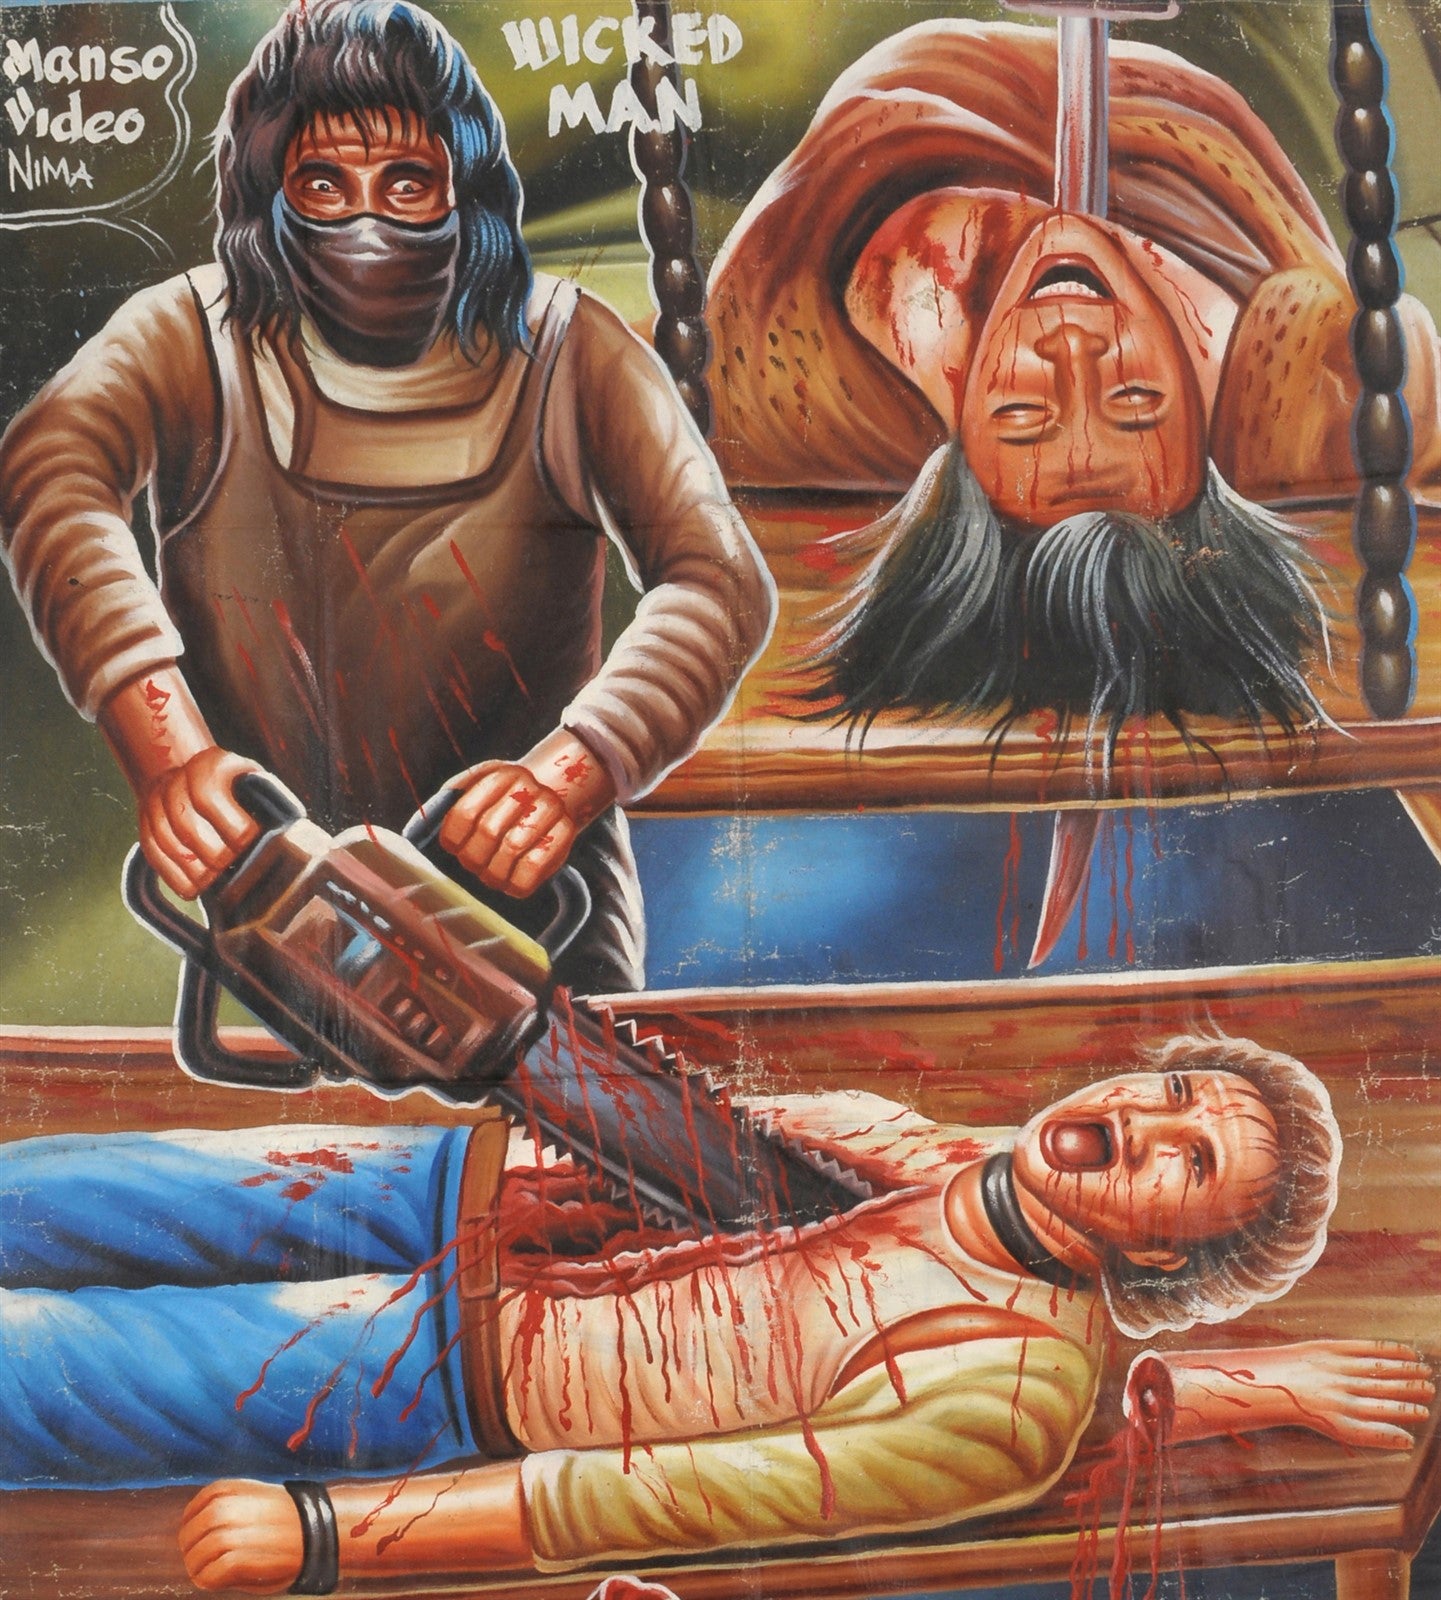 THE TEXAS CHAINSAW MASSACRE MOVIE POSTER HAND PAINTED IN GHANA FOR THE LOCAL CINEMA MORE DETAILS